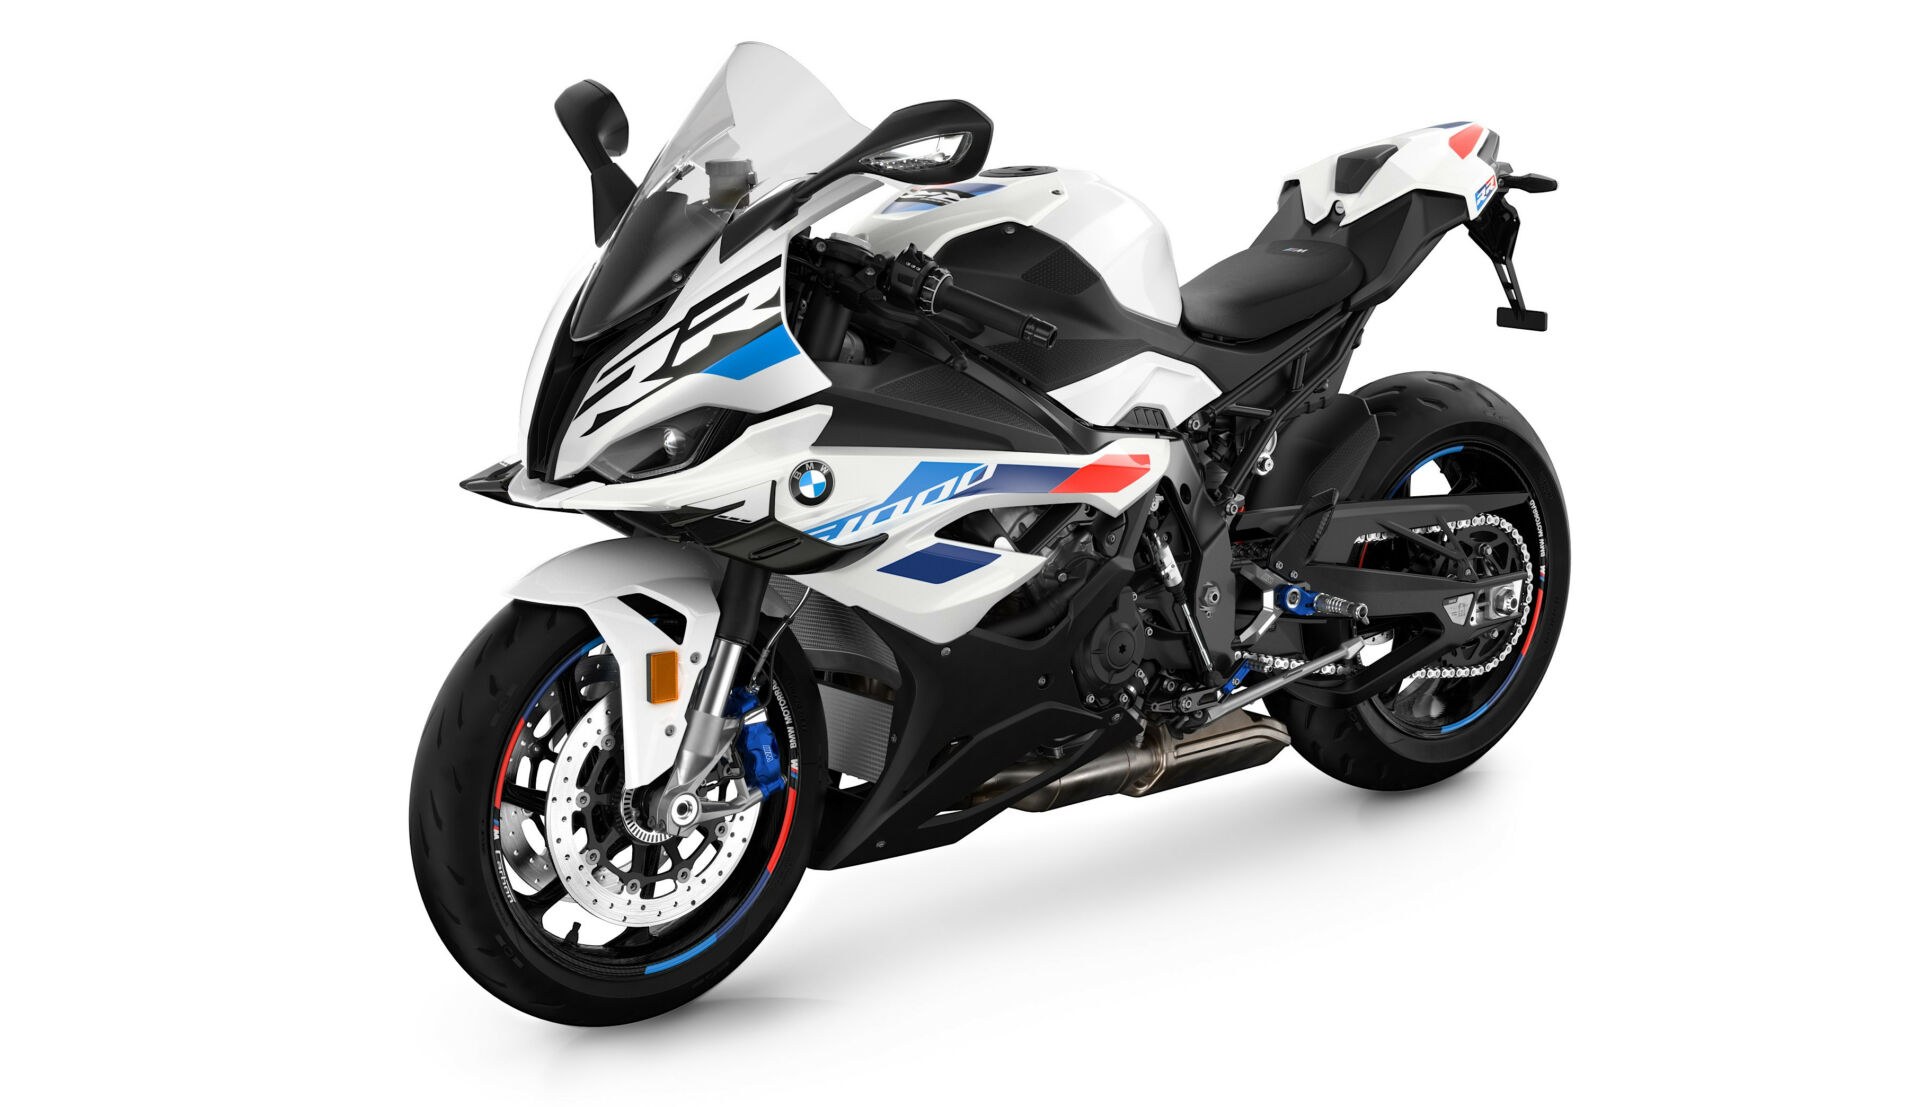 Telemacos Slud mangel BMW Unveils New And Improved 2023 S 1000 RR - Roadracing World Magazine |  Motorcycle Riding, Racing & Tech News